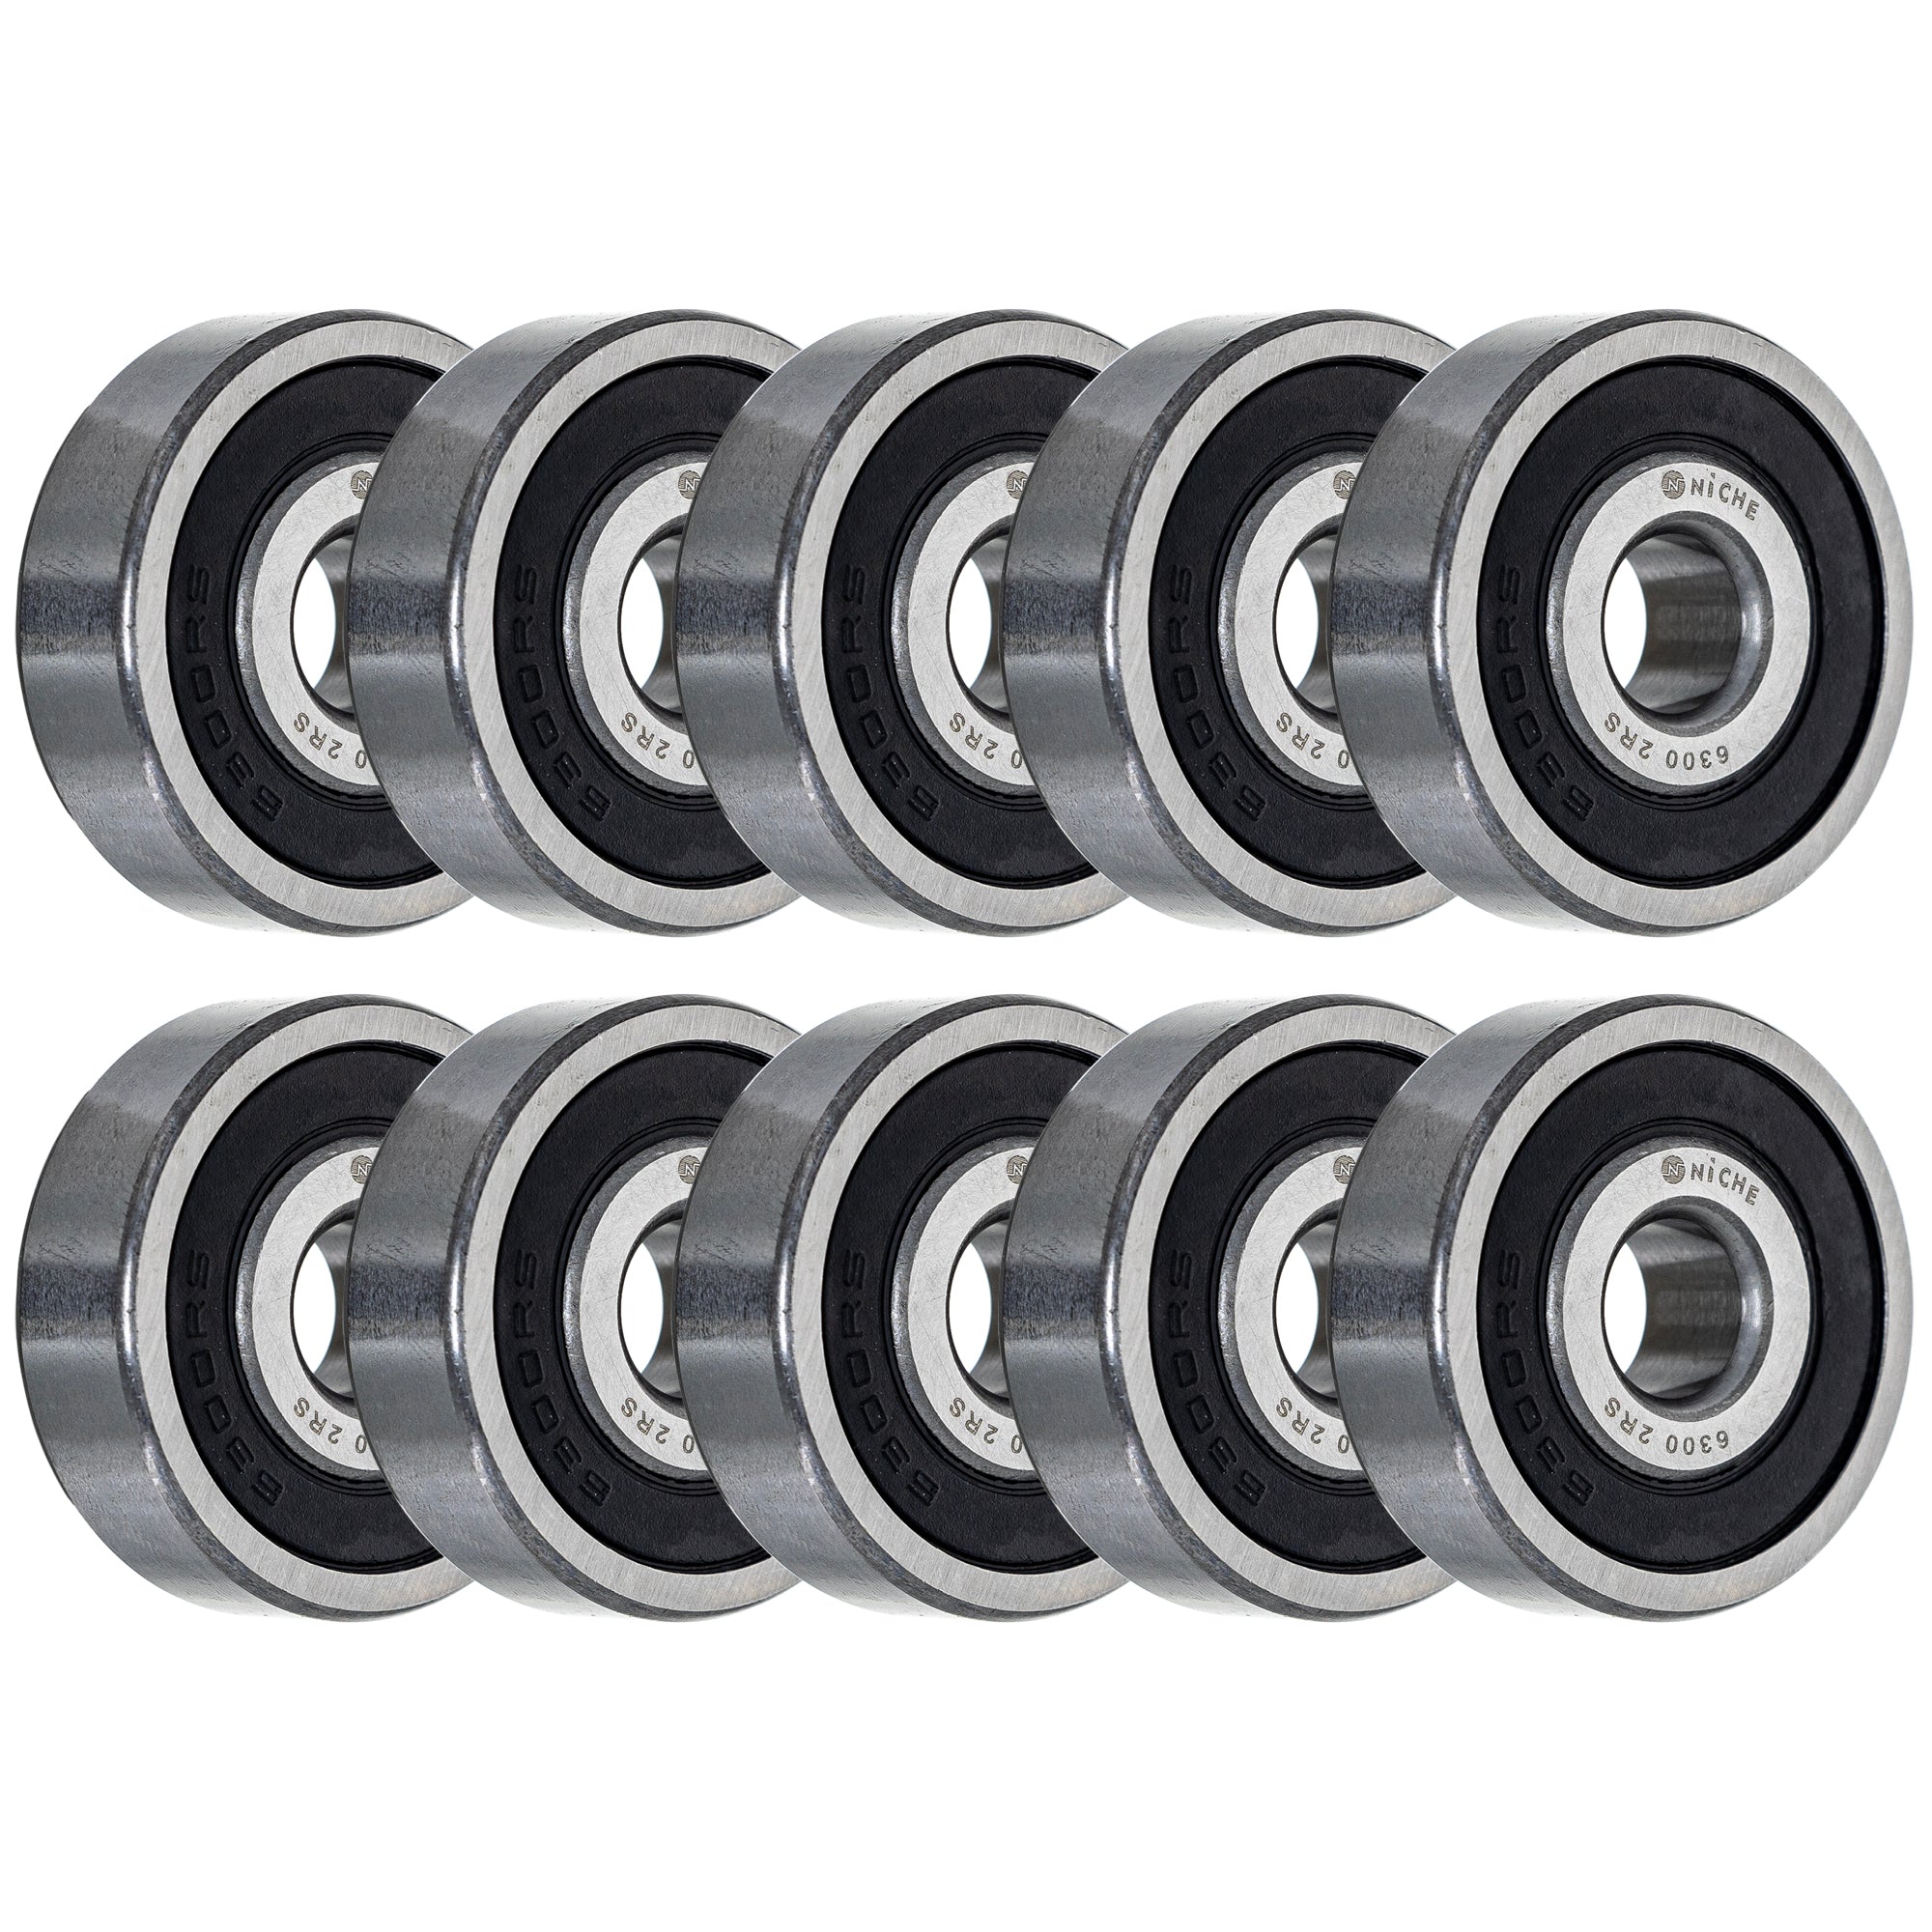 Single Row, Deep Groove, Ball Bearing Pack of 10 10-Pack for zOTHER RM60 KX80 KX60 KM100 NICHE 519-CBB2265R